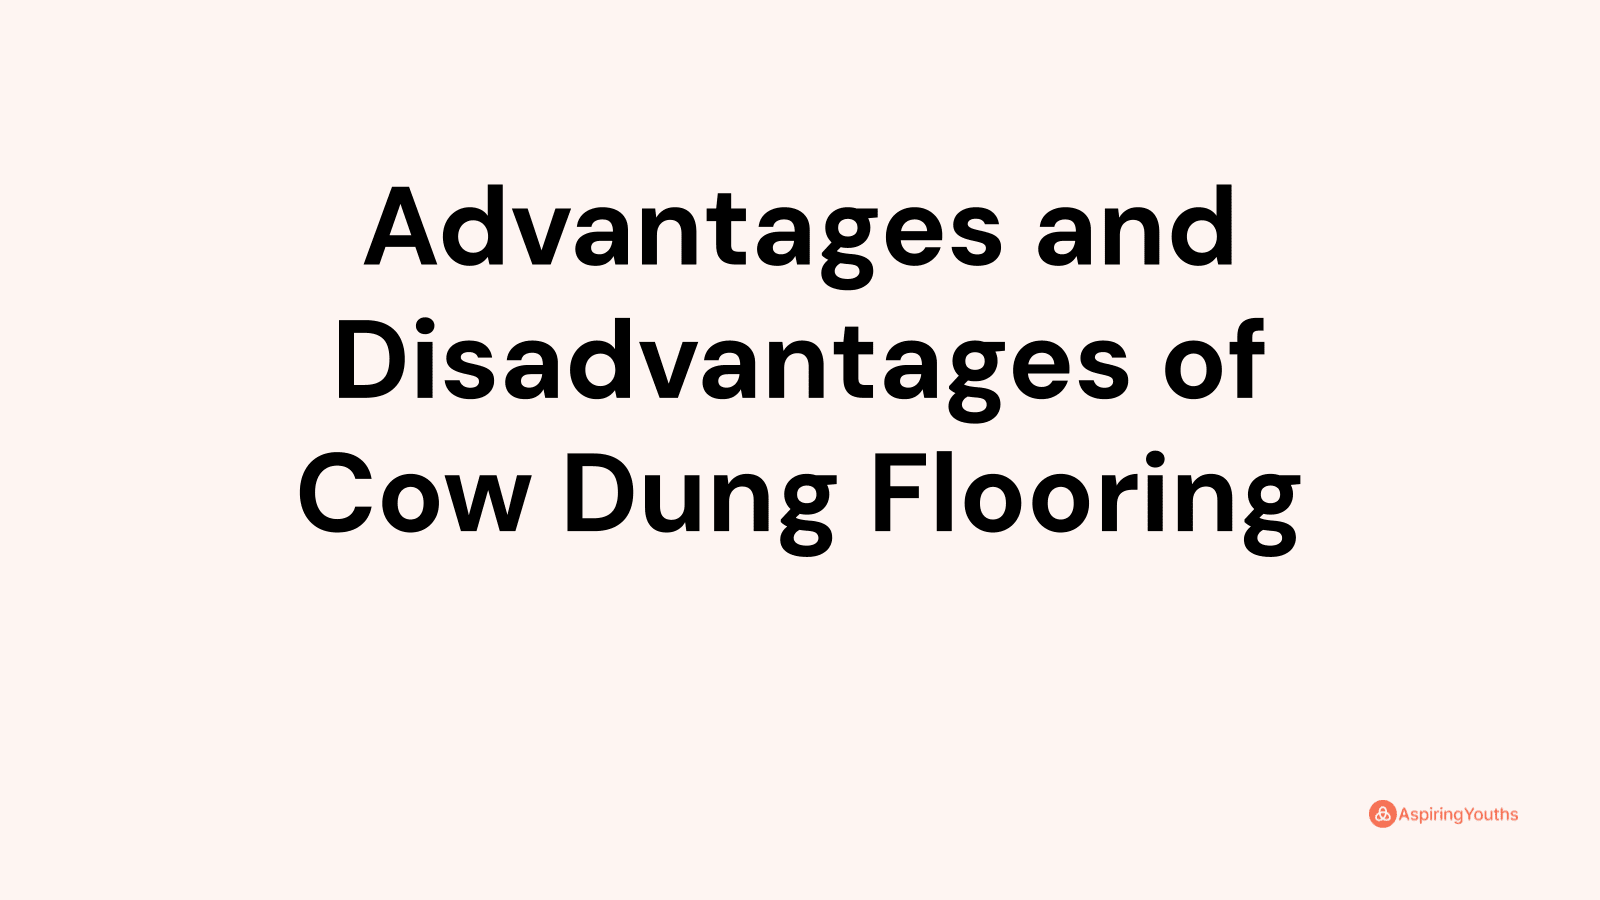 Advantages and disadvantages of Cow Dung Flooring